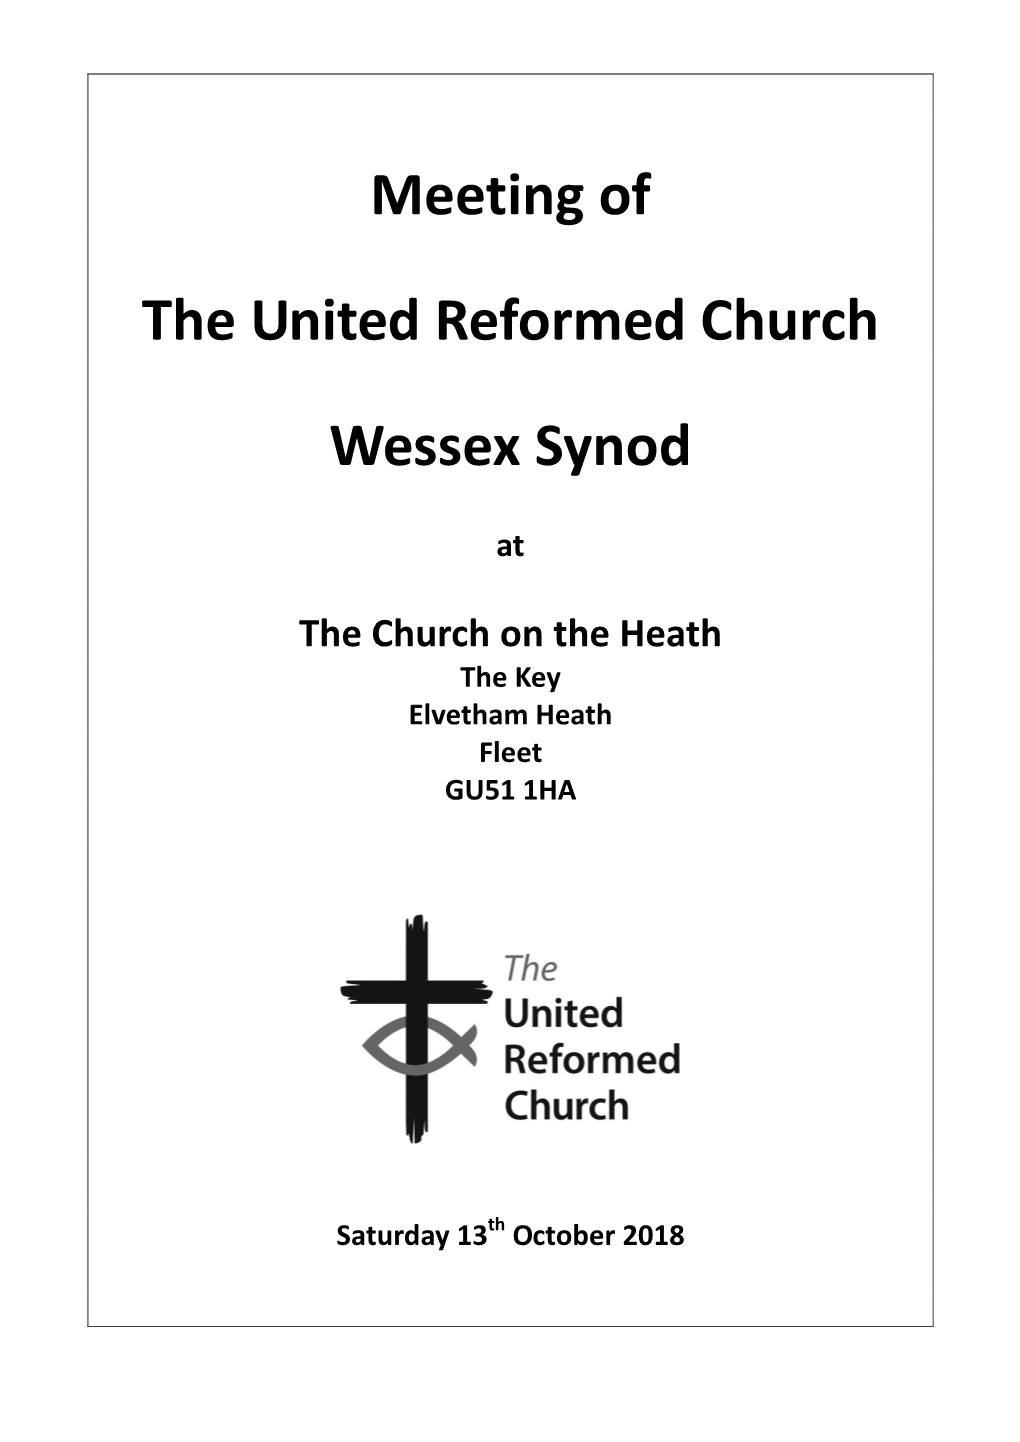 Meeting of the United Reformed Church Wessex Synod